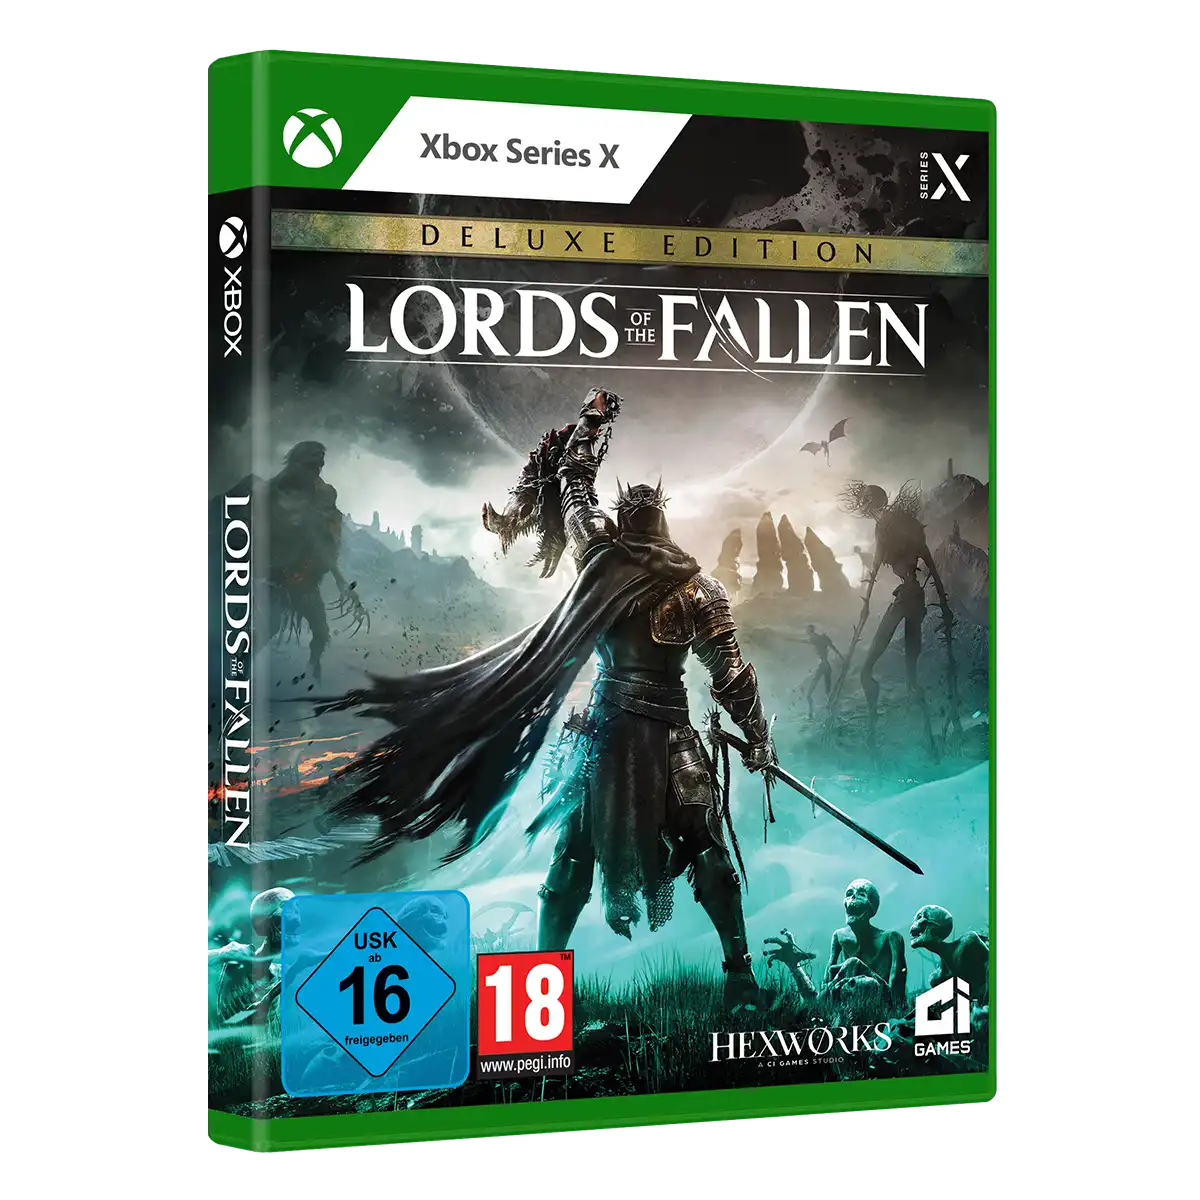 Lords of the Fallen Deluxe Edition (Xbox Series X) Image 2